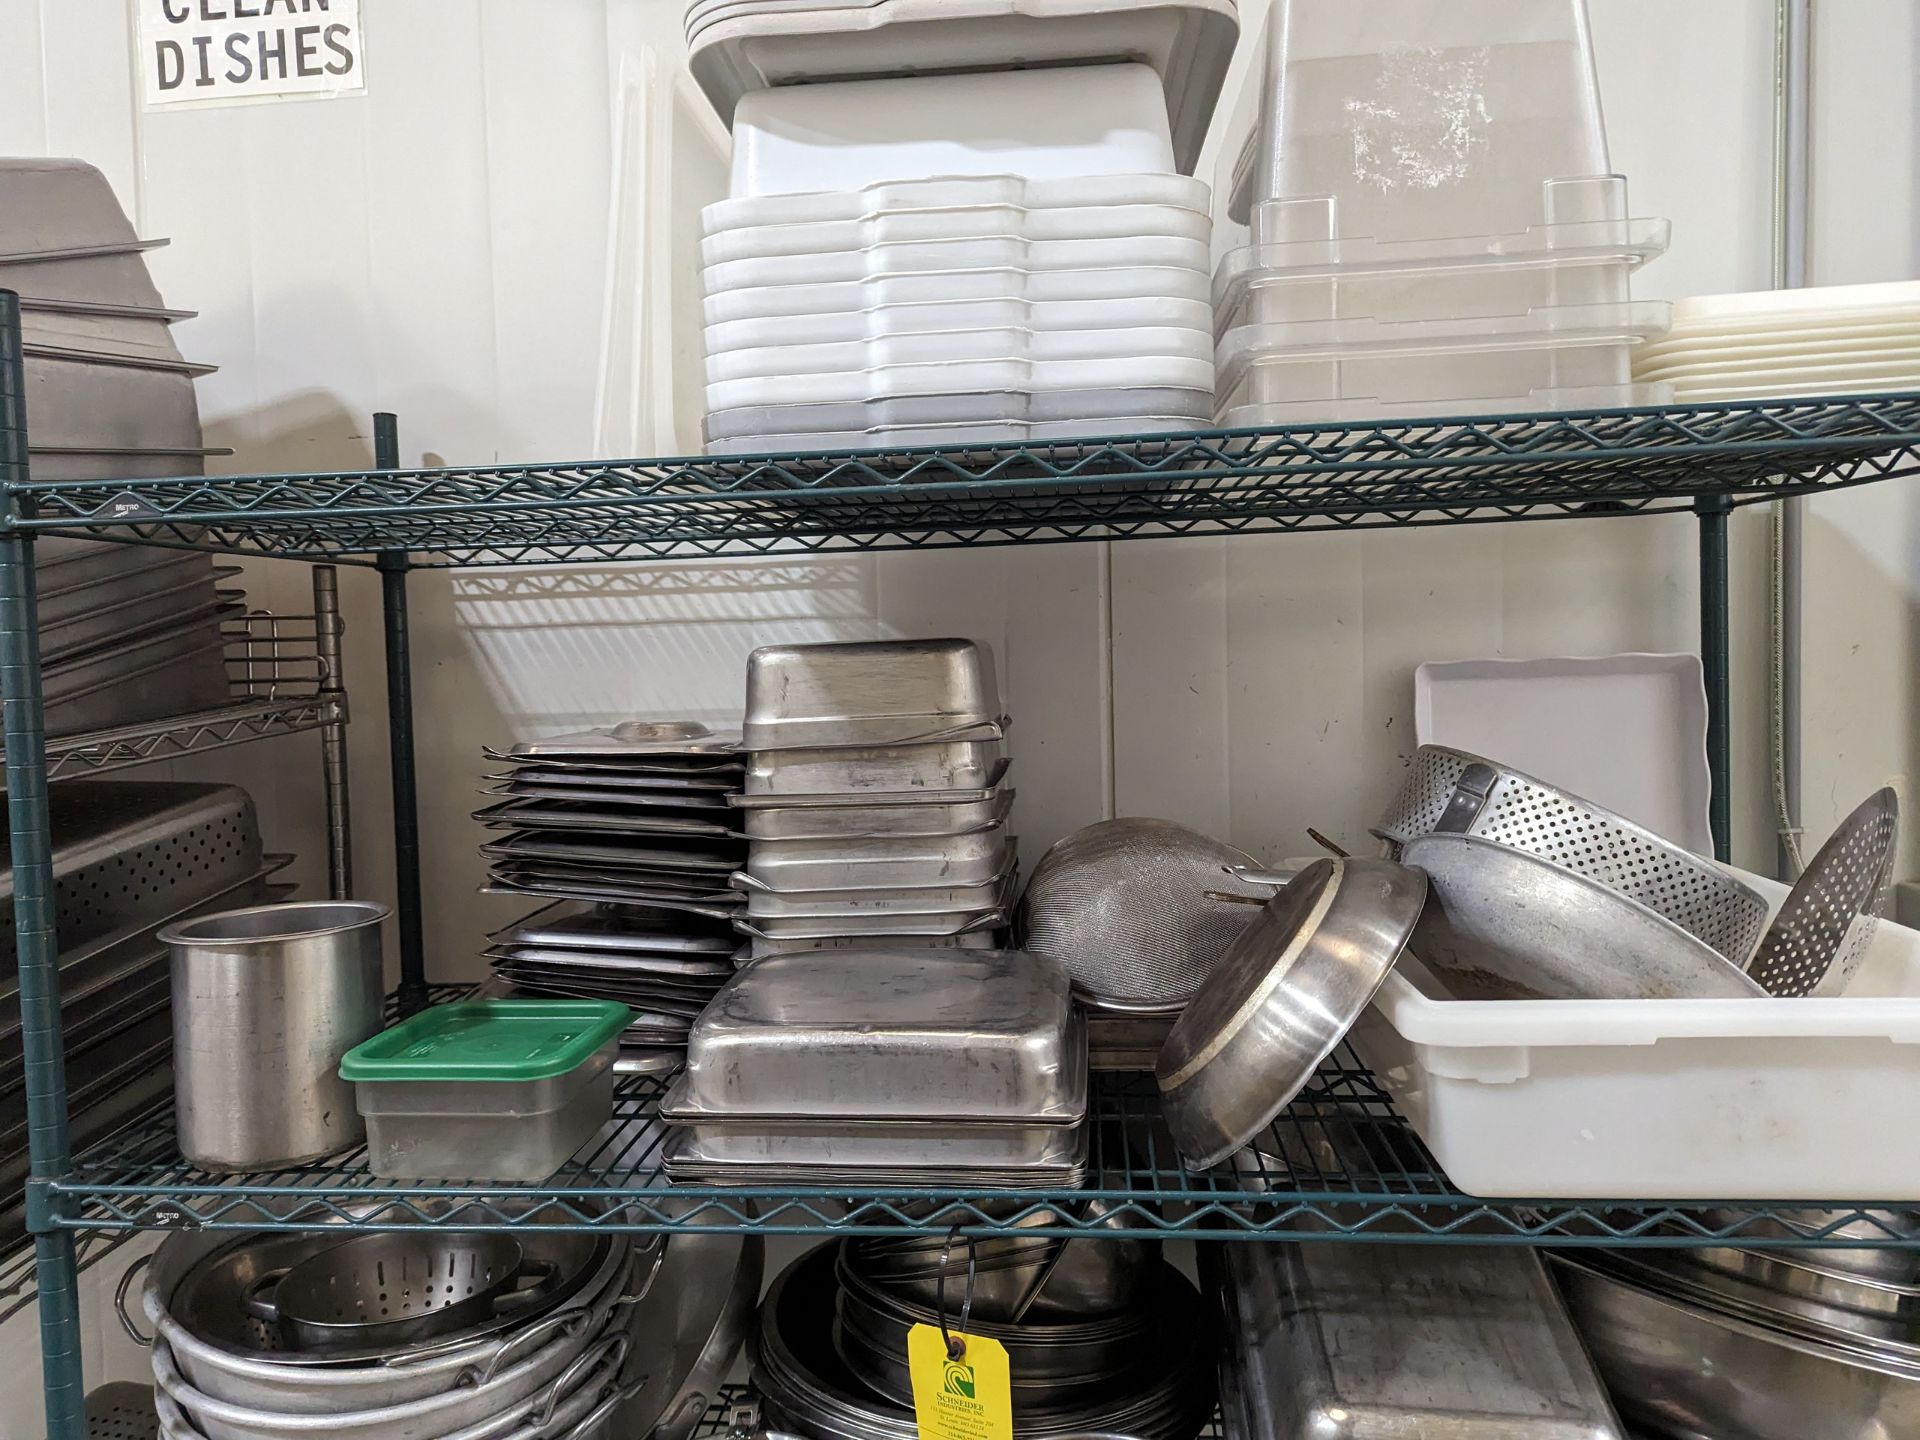 Lot of Cookware including Storage Rack 60x24x75 - Image 4 of 5